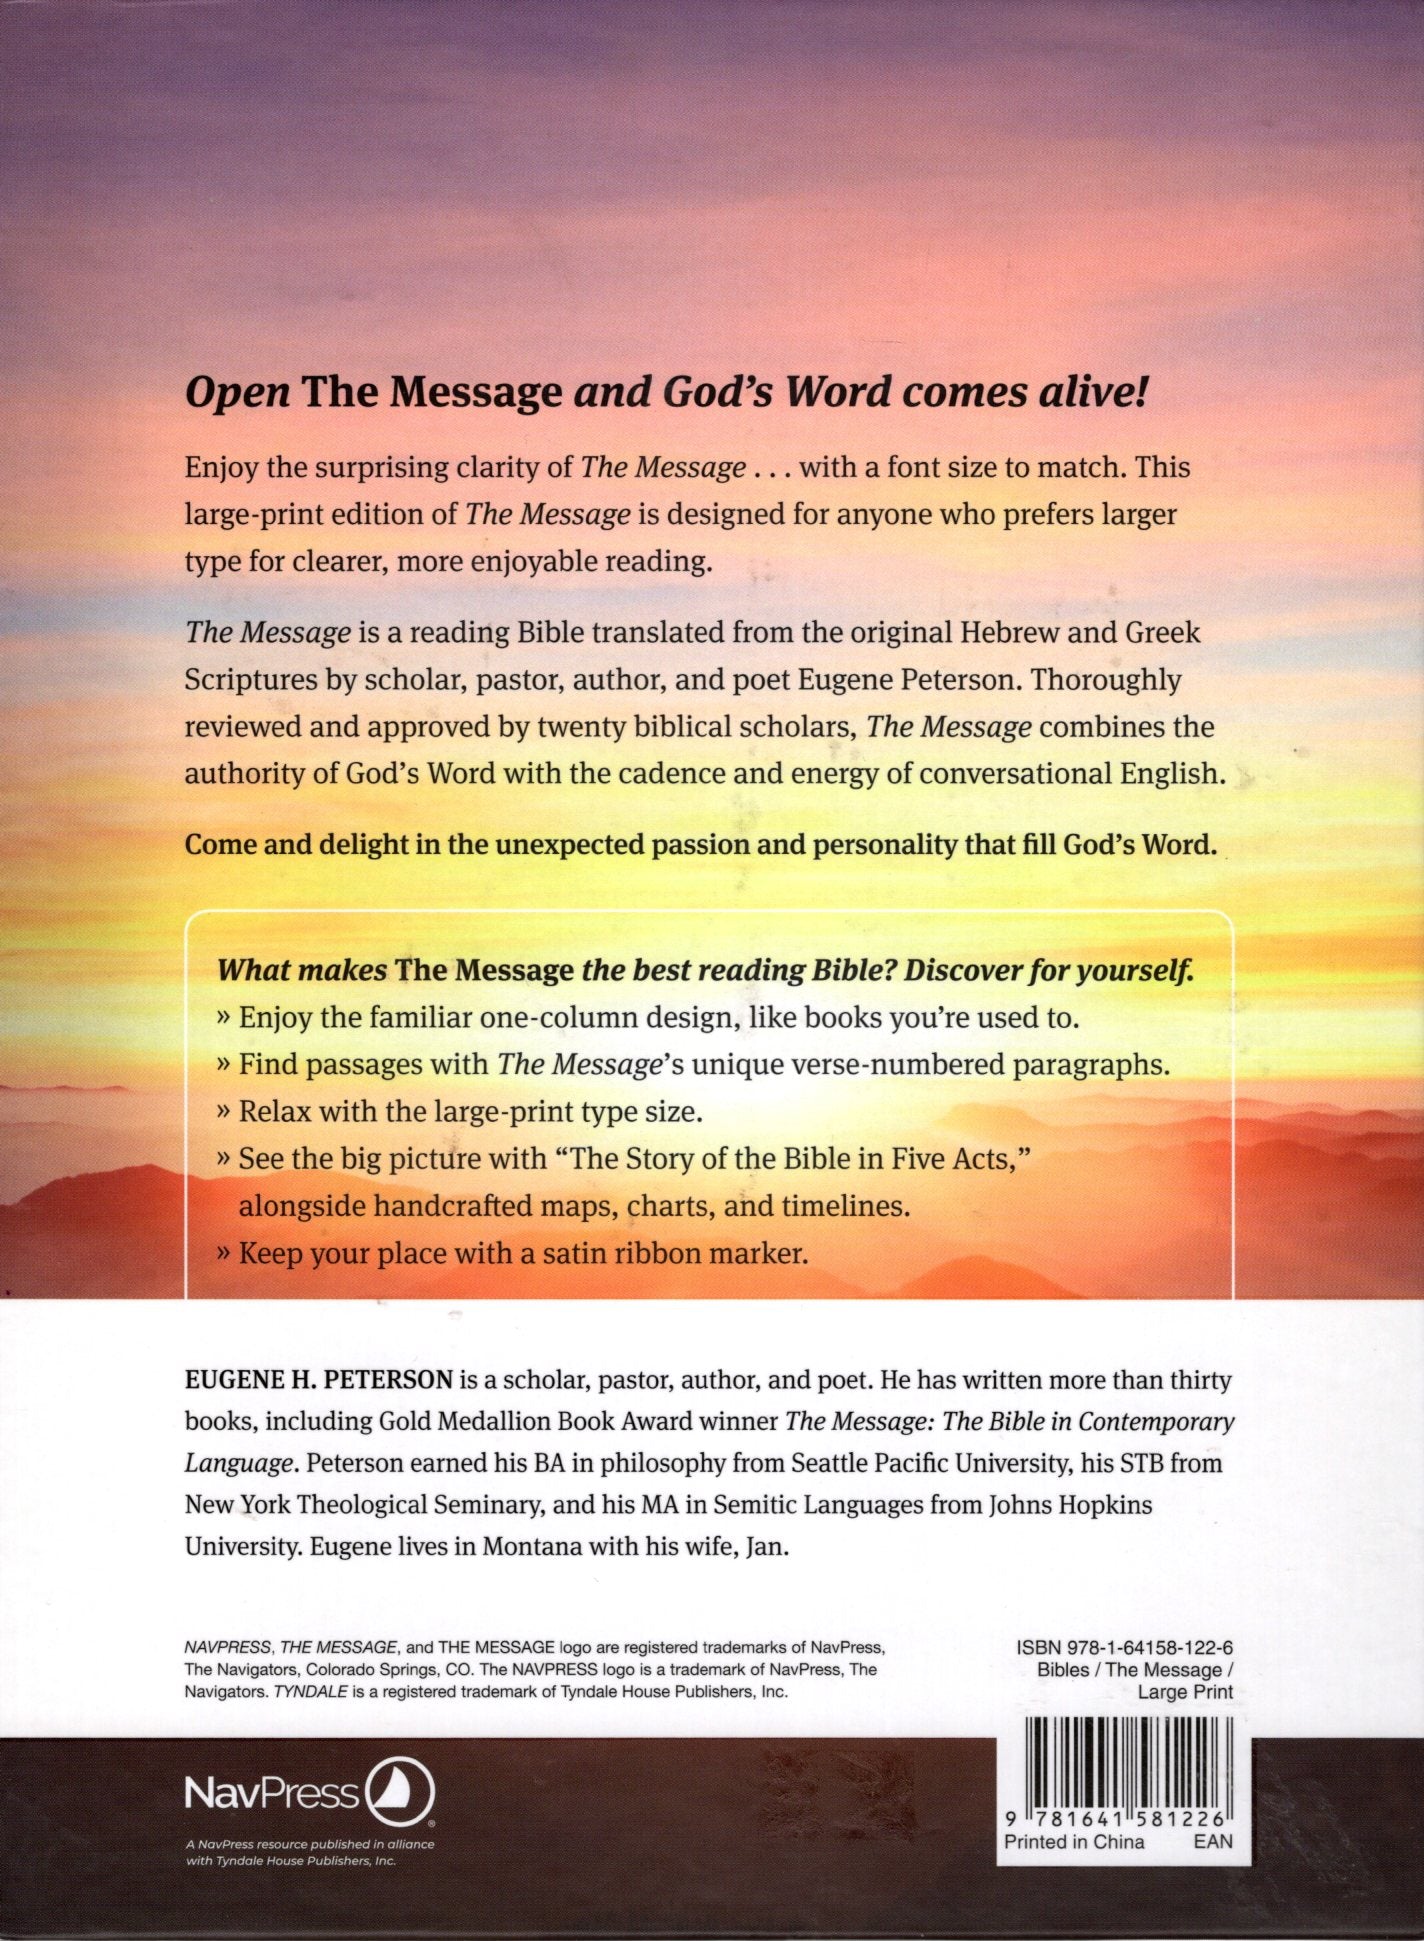 NavPress The Message: The Bible in Contemporary Language, Large Print - Hardcover w/Protective Sleeve (Charcoal Linen Cross Deluxe Hardcover)